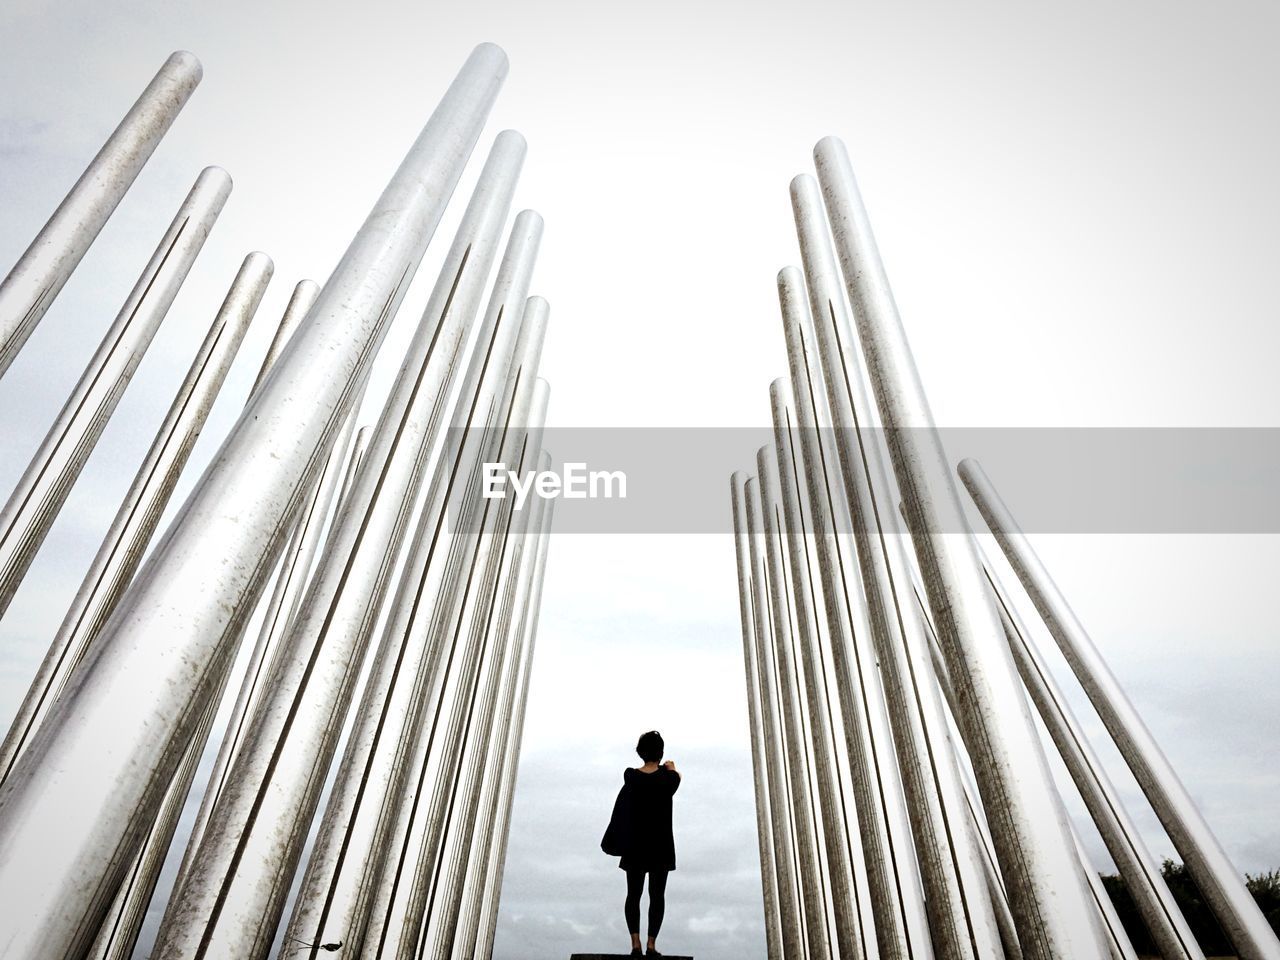 Rear view of woman standing amidst metal poles against sky